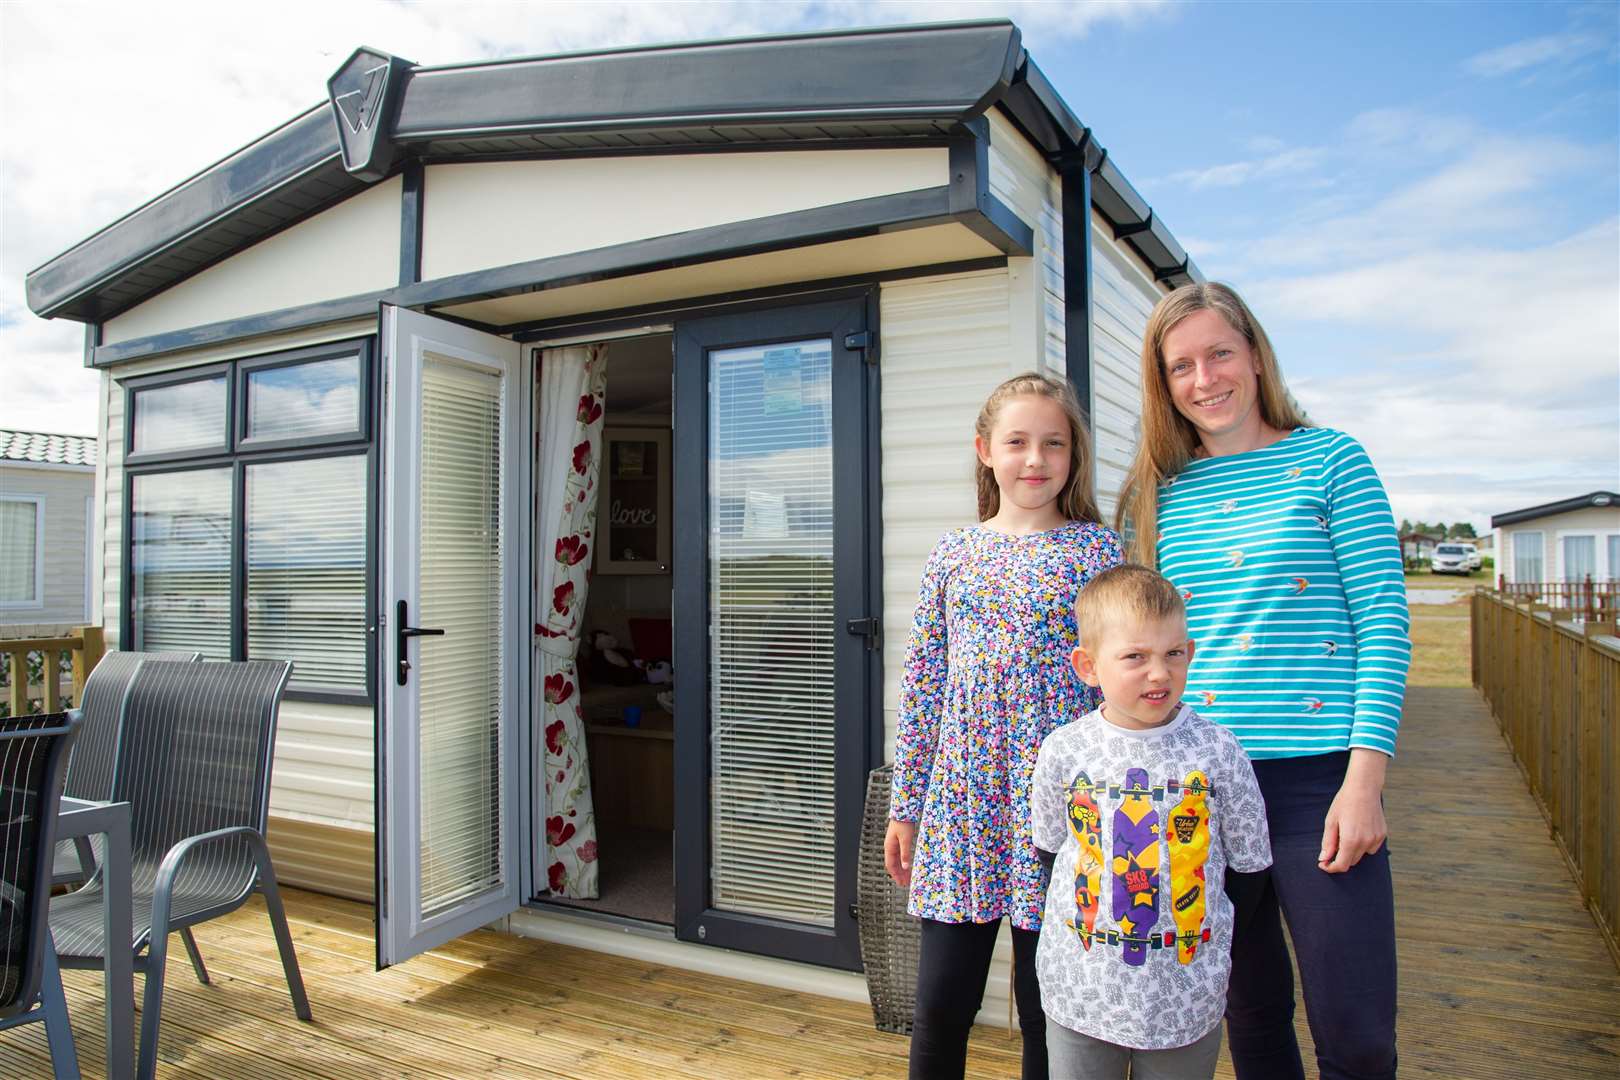 The Rejzner family, from Inverurie, the first family to stay at the Logan's Fund Sunny Days caravan in Lossiemouth following the coronavirus lockdown – mum Iwona with children Olaf and Maria. Picture: Daniel Forsyth.